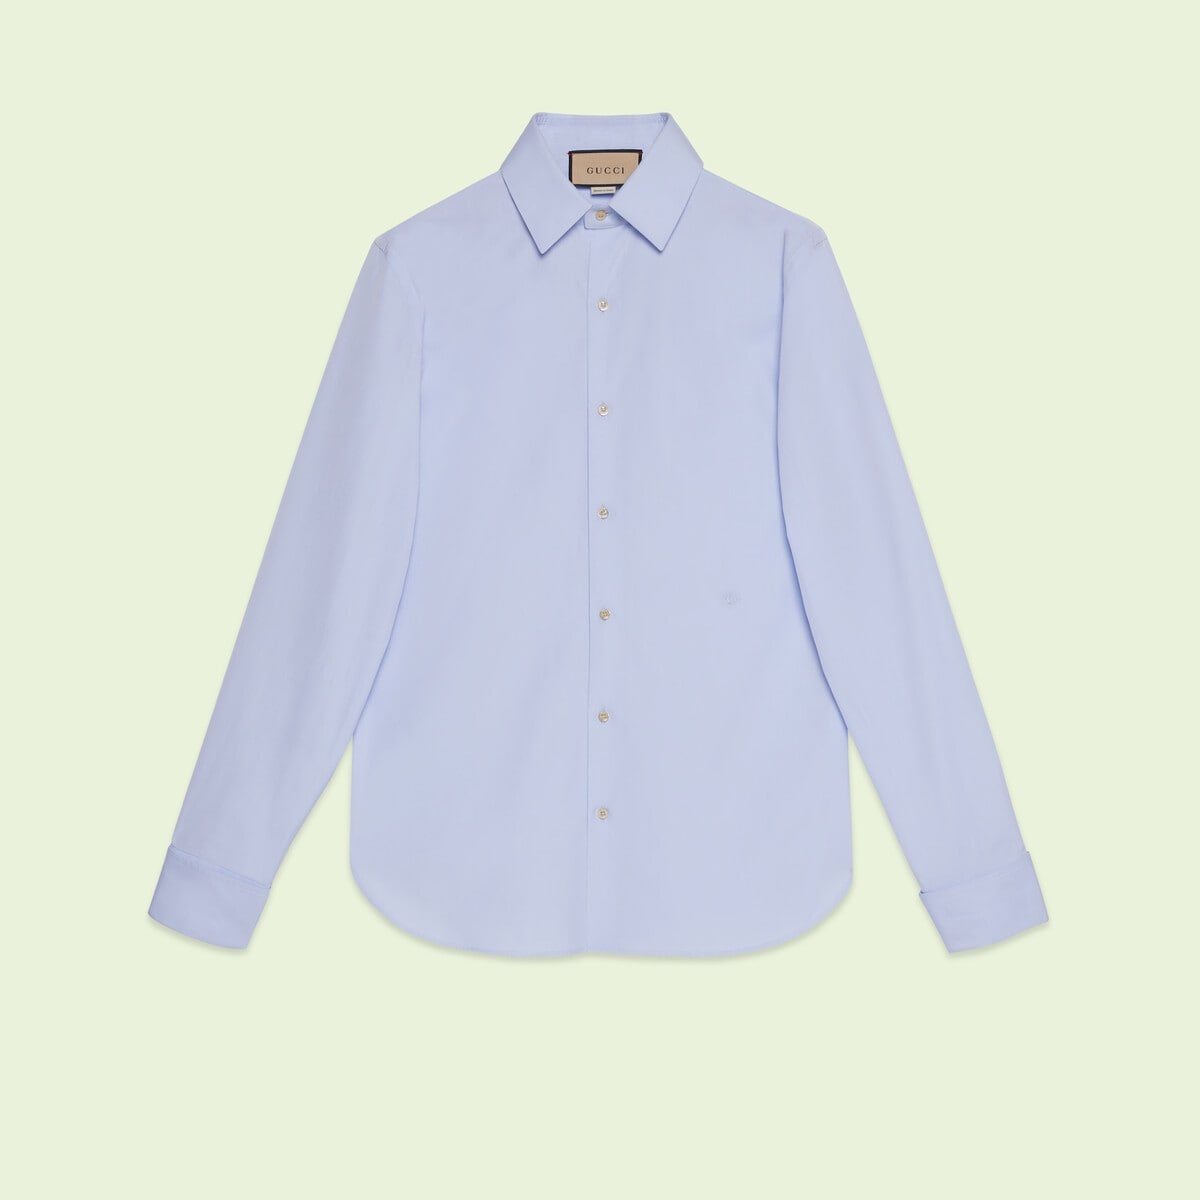 Cotton poplin shirt with Double G - 1